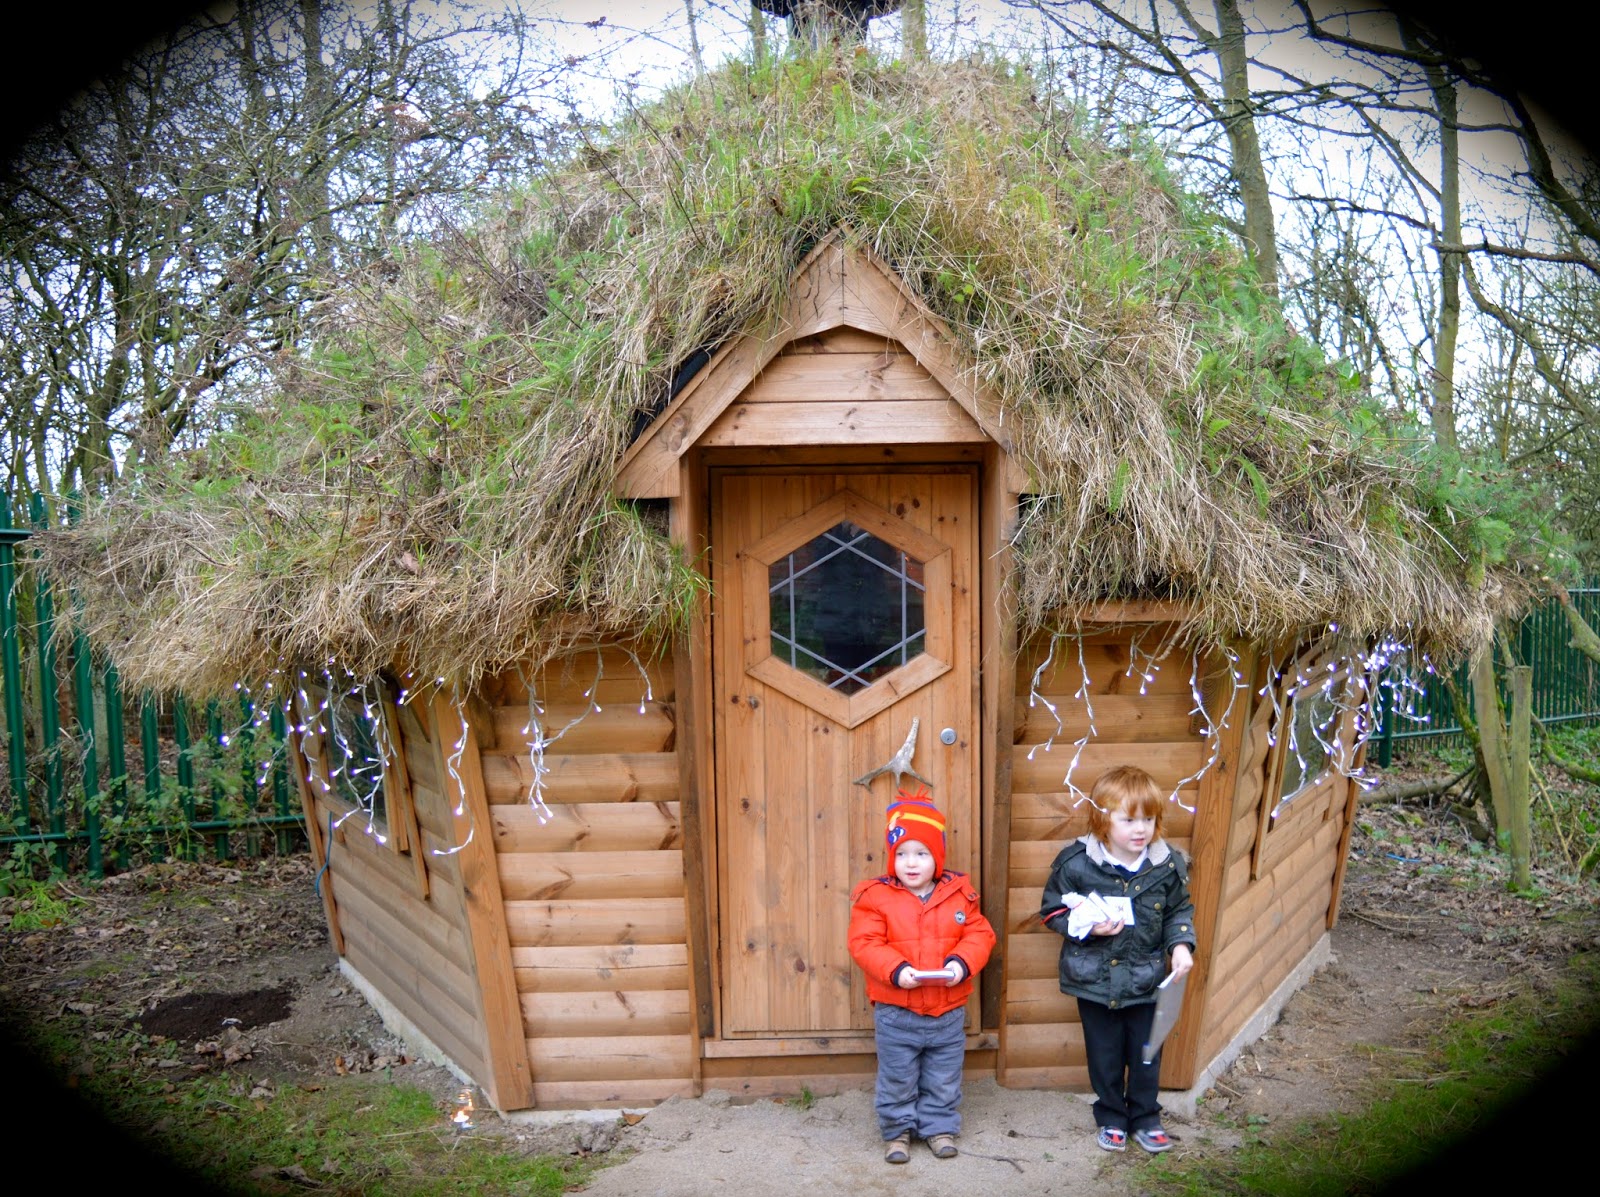 The Best Santa Experiences in North East England - Rising Sun Country Park